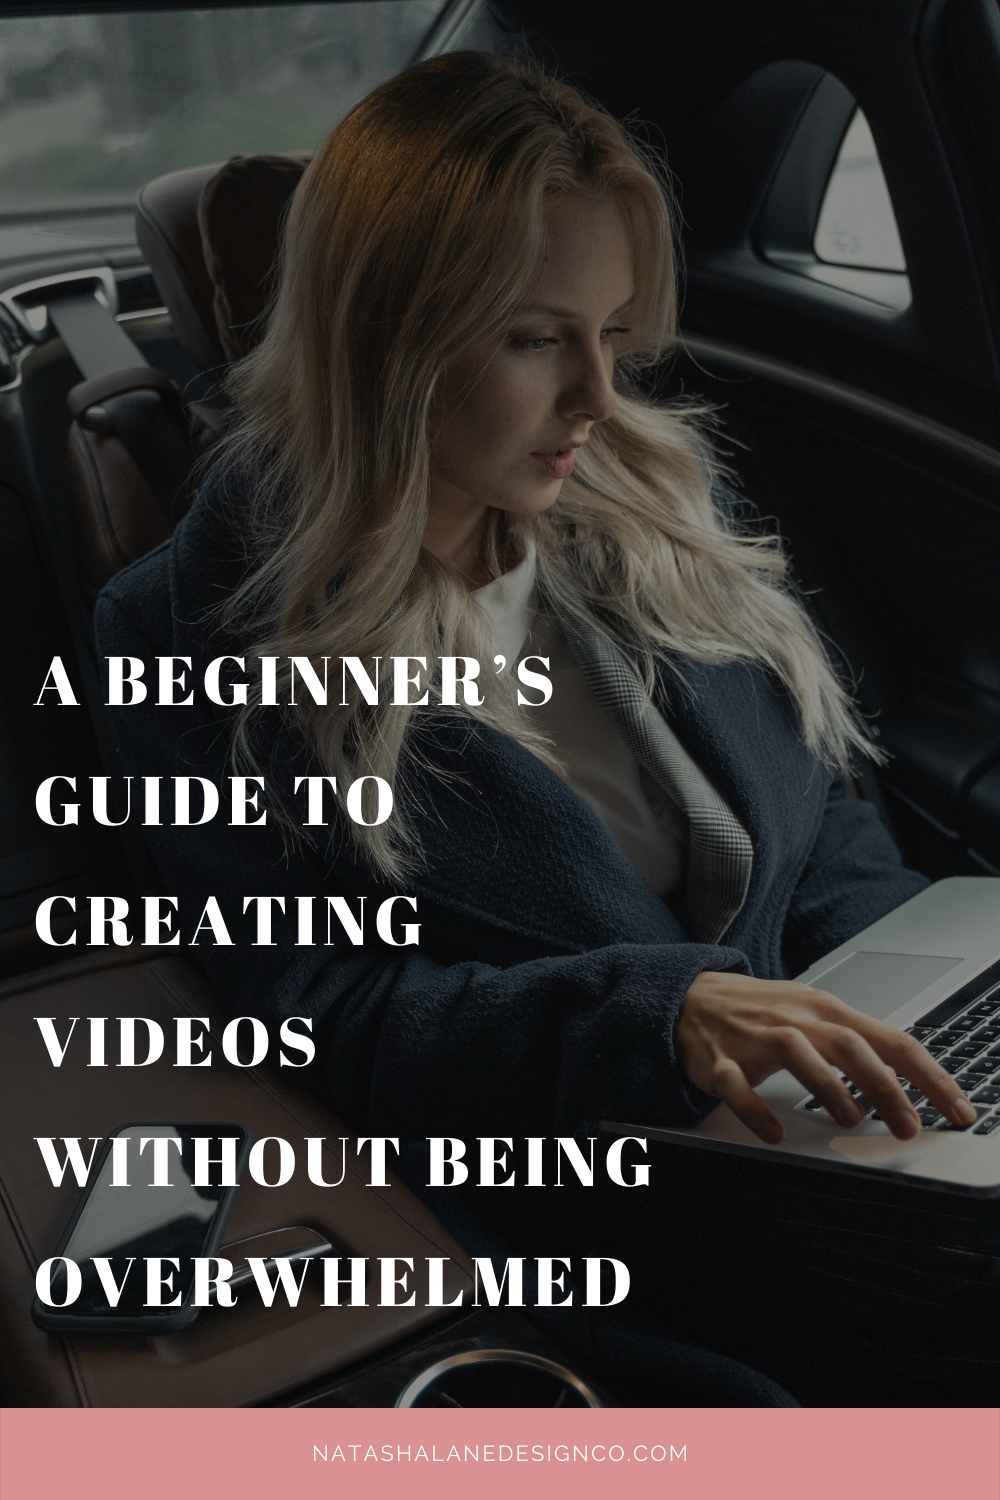 A beginner’s guide to creating videos without being overwhelmed (2)